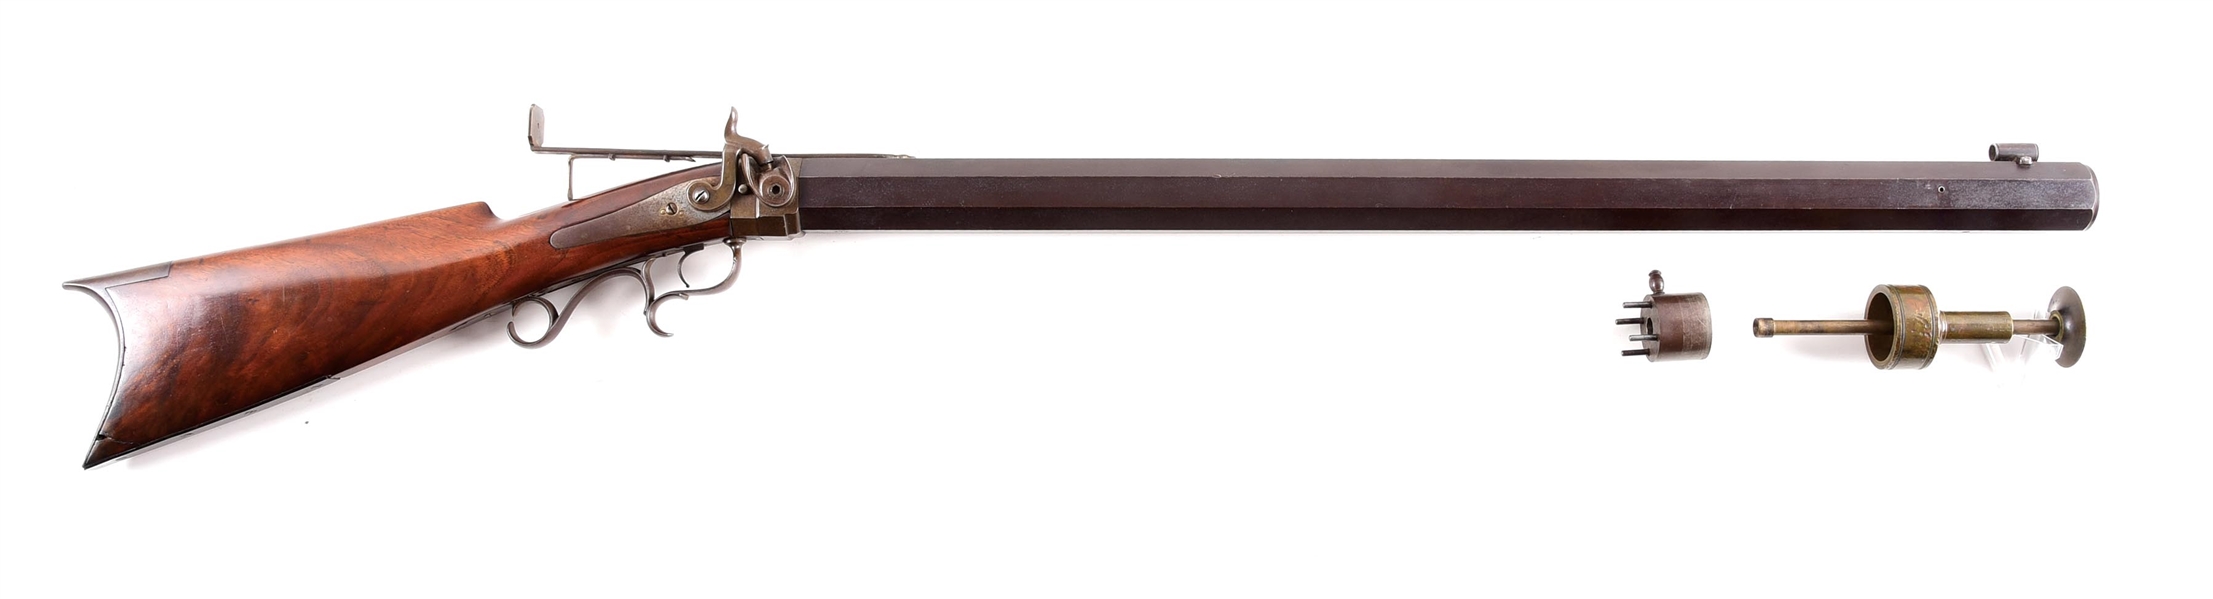 (A) W.W. WETMORE PERCUSSION TARGET RIFLE.